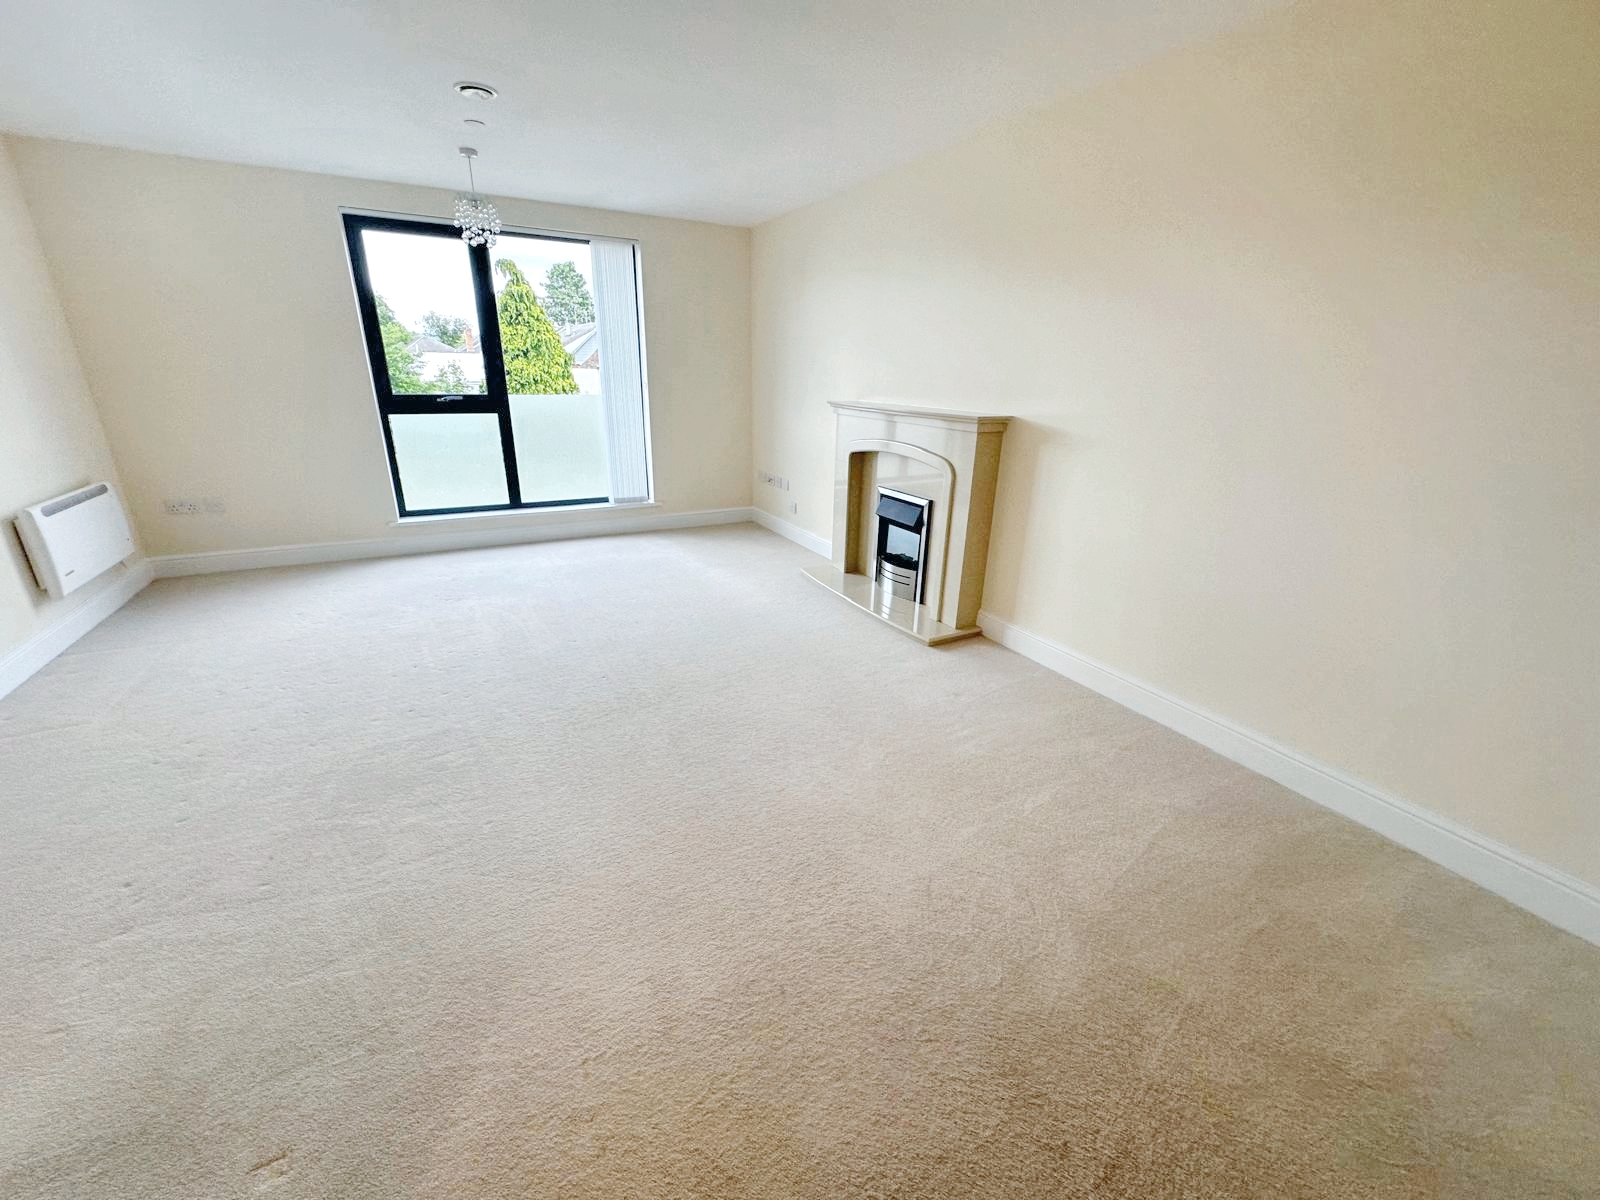 Lounge of Apartment 9, a luxury 2 bedroom retirement apartment at Honeybourne Gate.